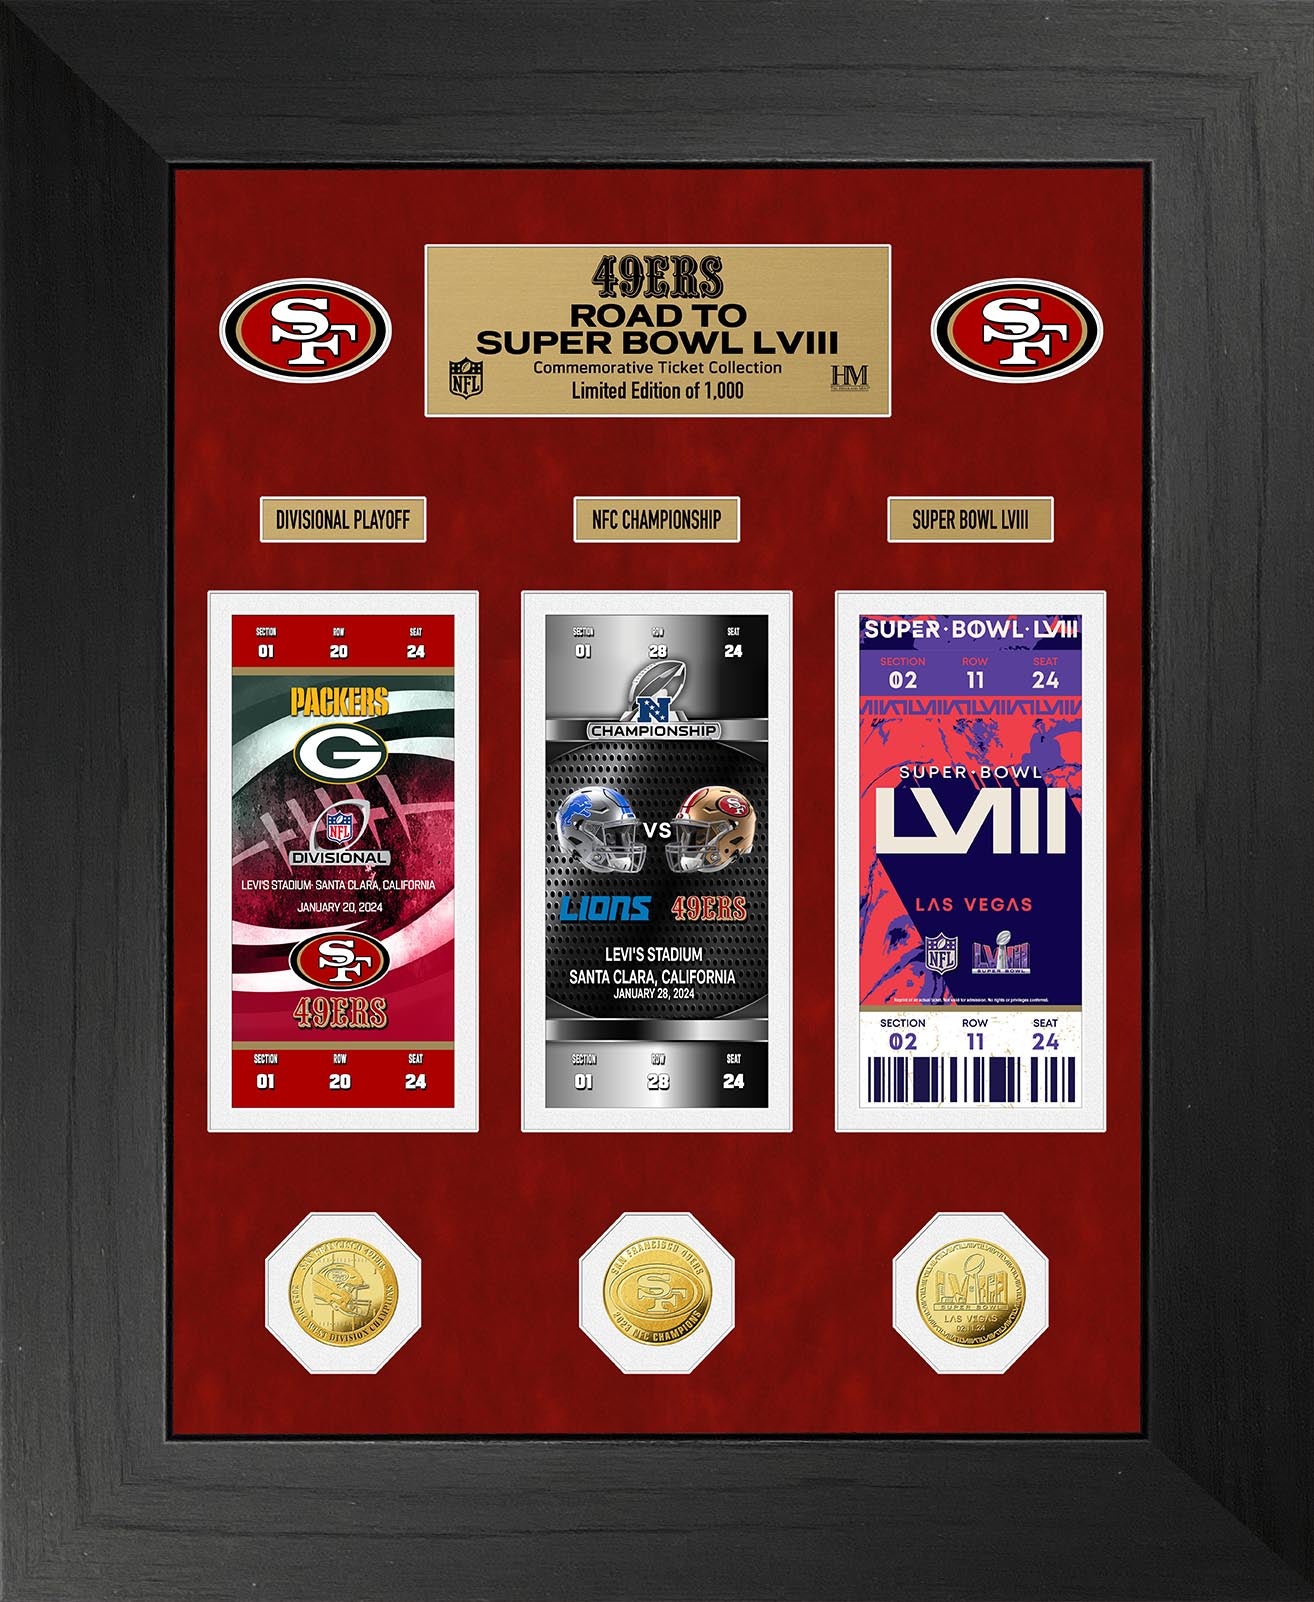 San Francisco 49ers Road to Super Bowl 58 Deluxe Ticket and Gold Coin Photo Mint